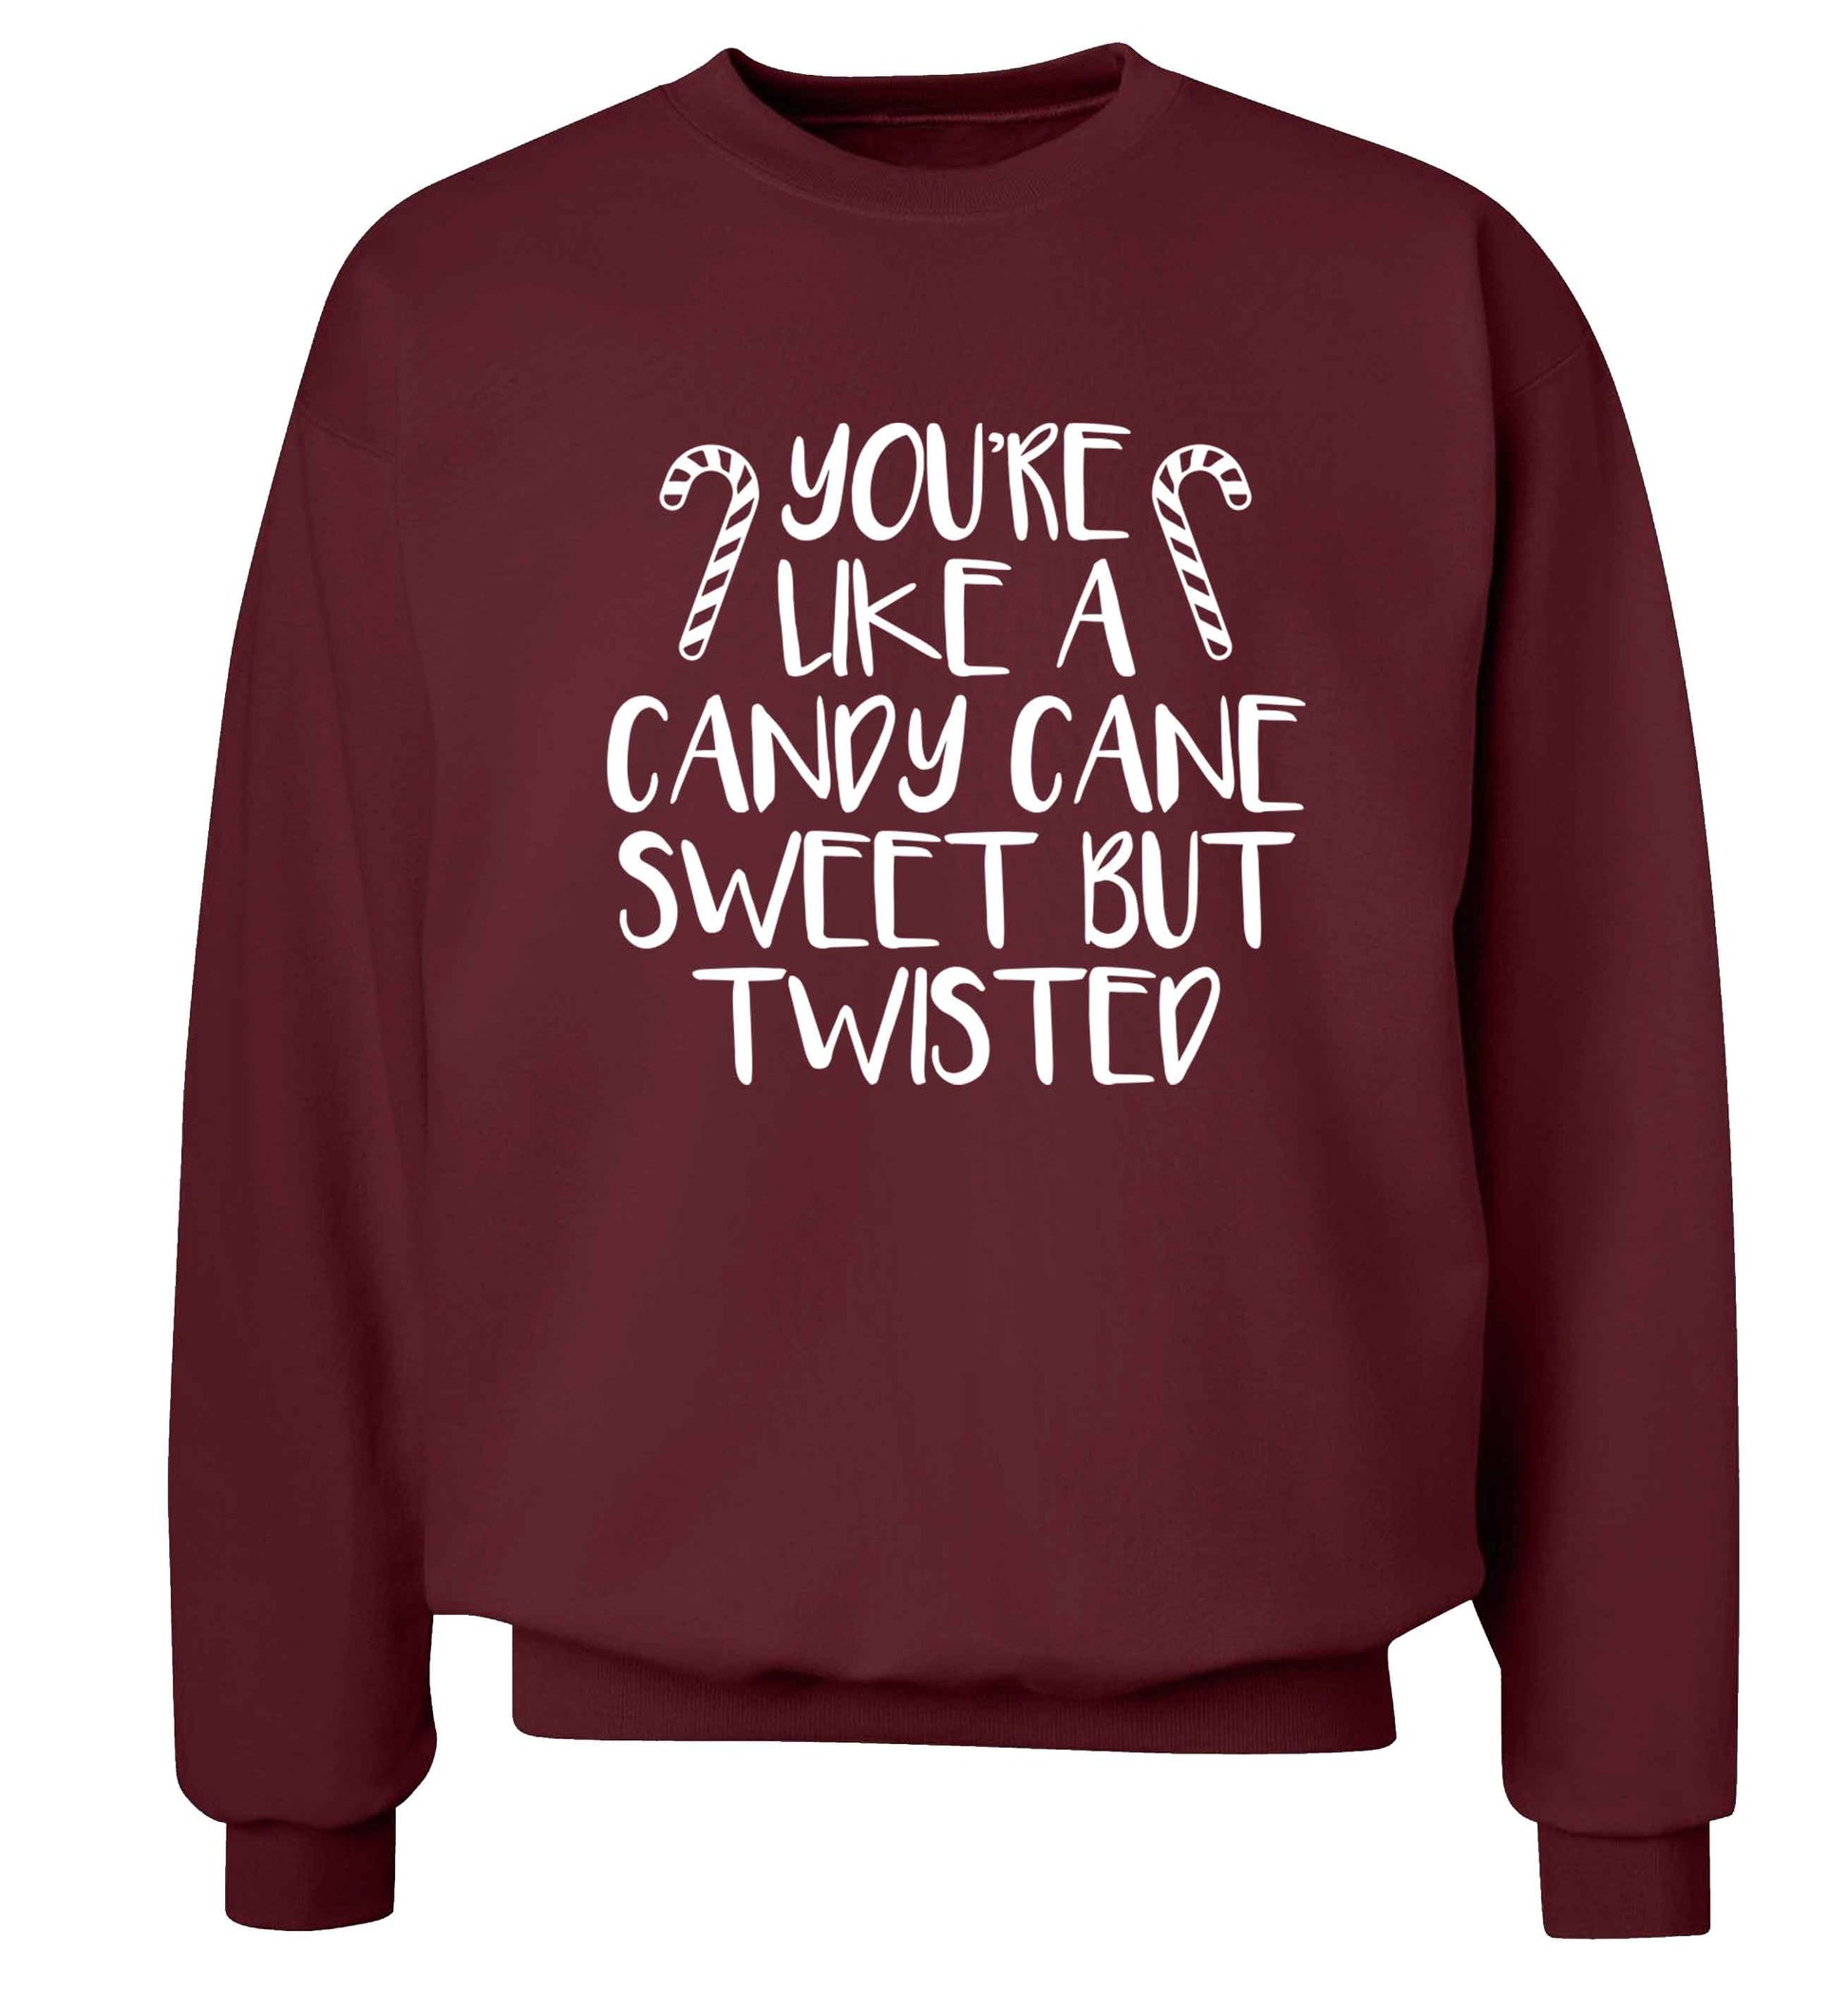 You're like a candy cane sweet but twisted Adult's unisex maroon Sweater 2XL